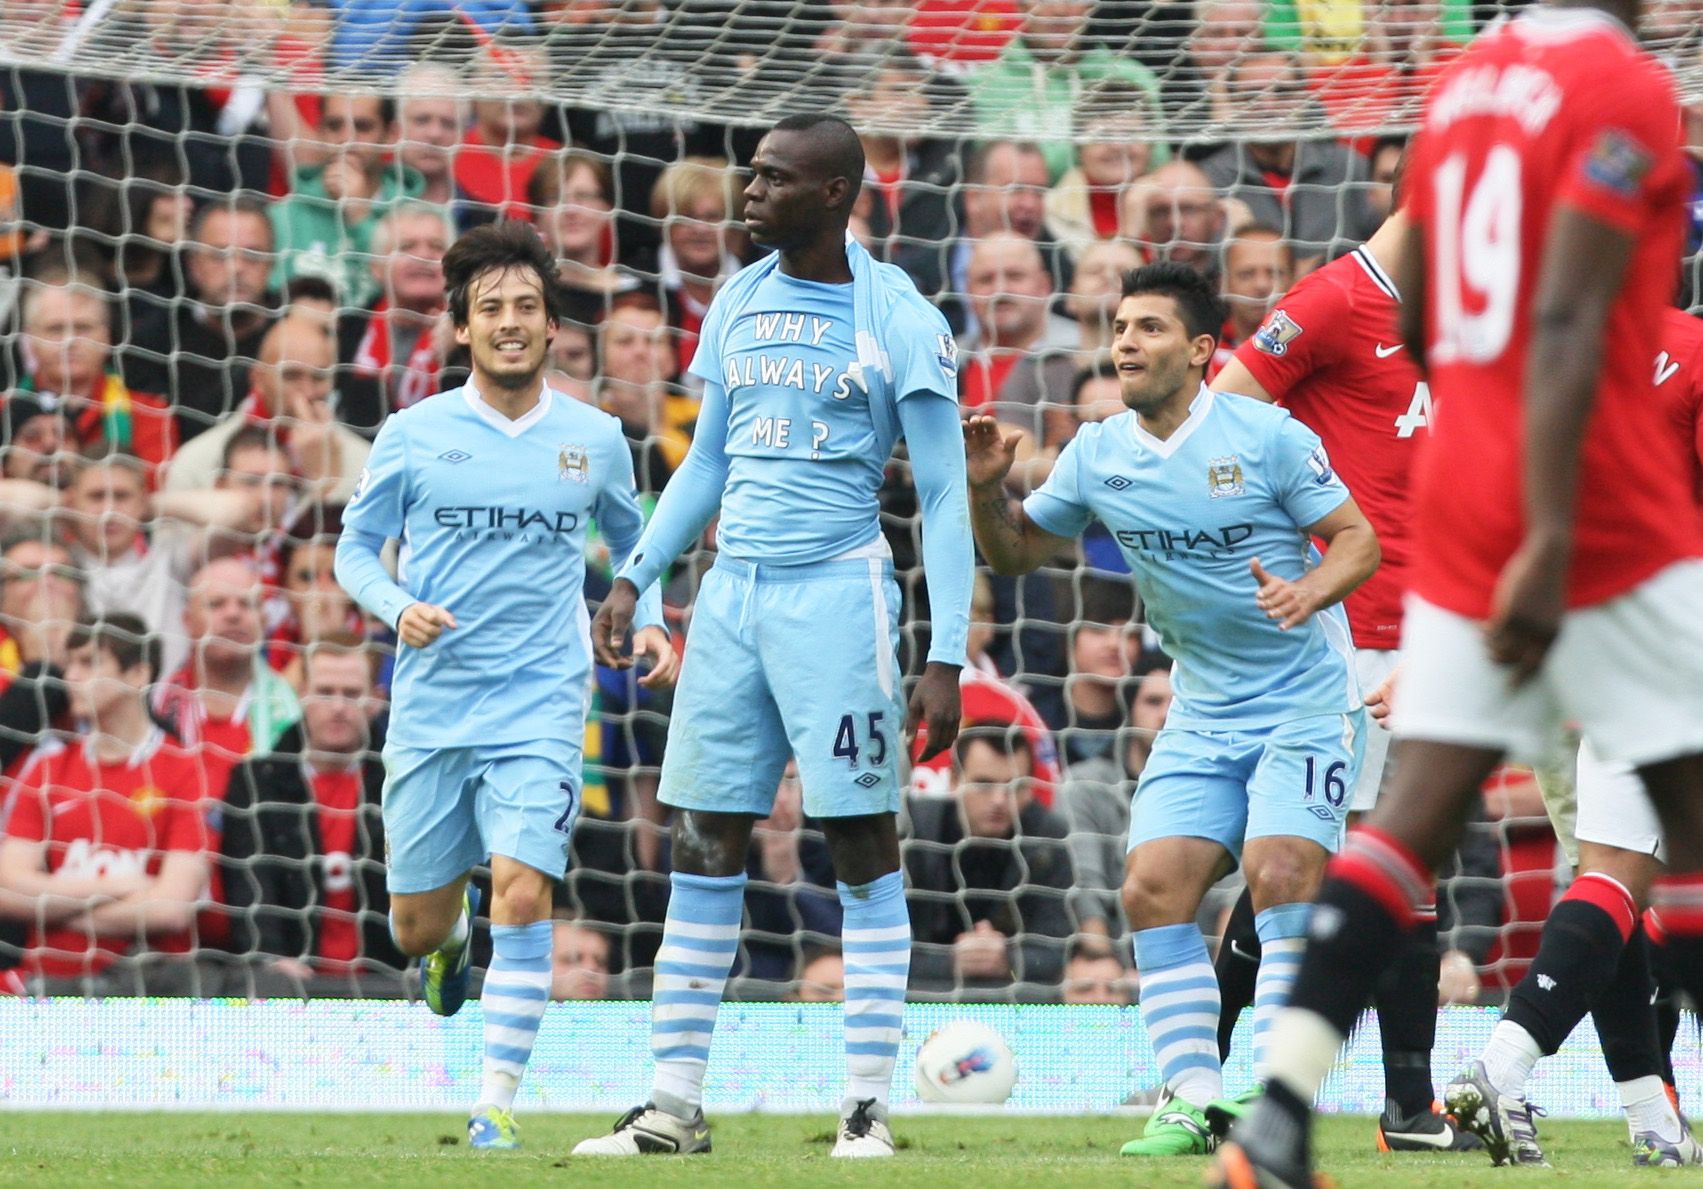 Mario Balotelli of Manchester City scores against Manchester united